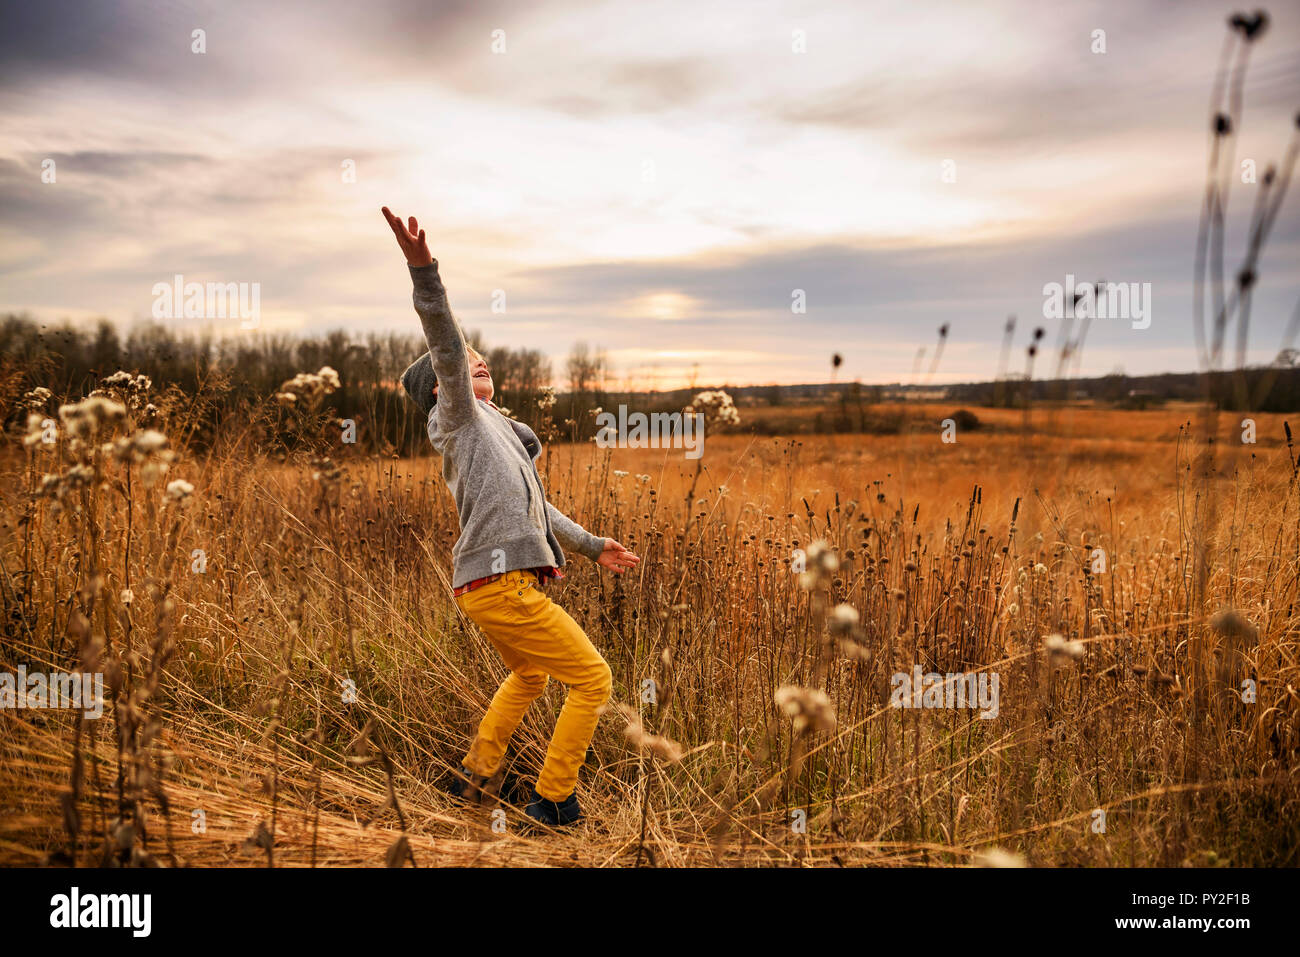 Boy standing in a field reaching for the sky, United States Stock Photo